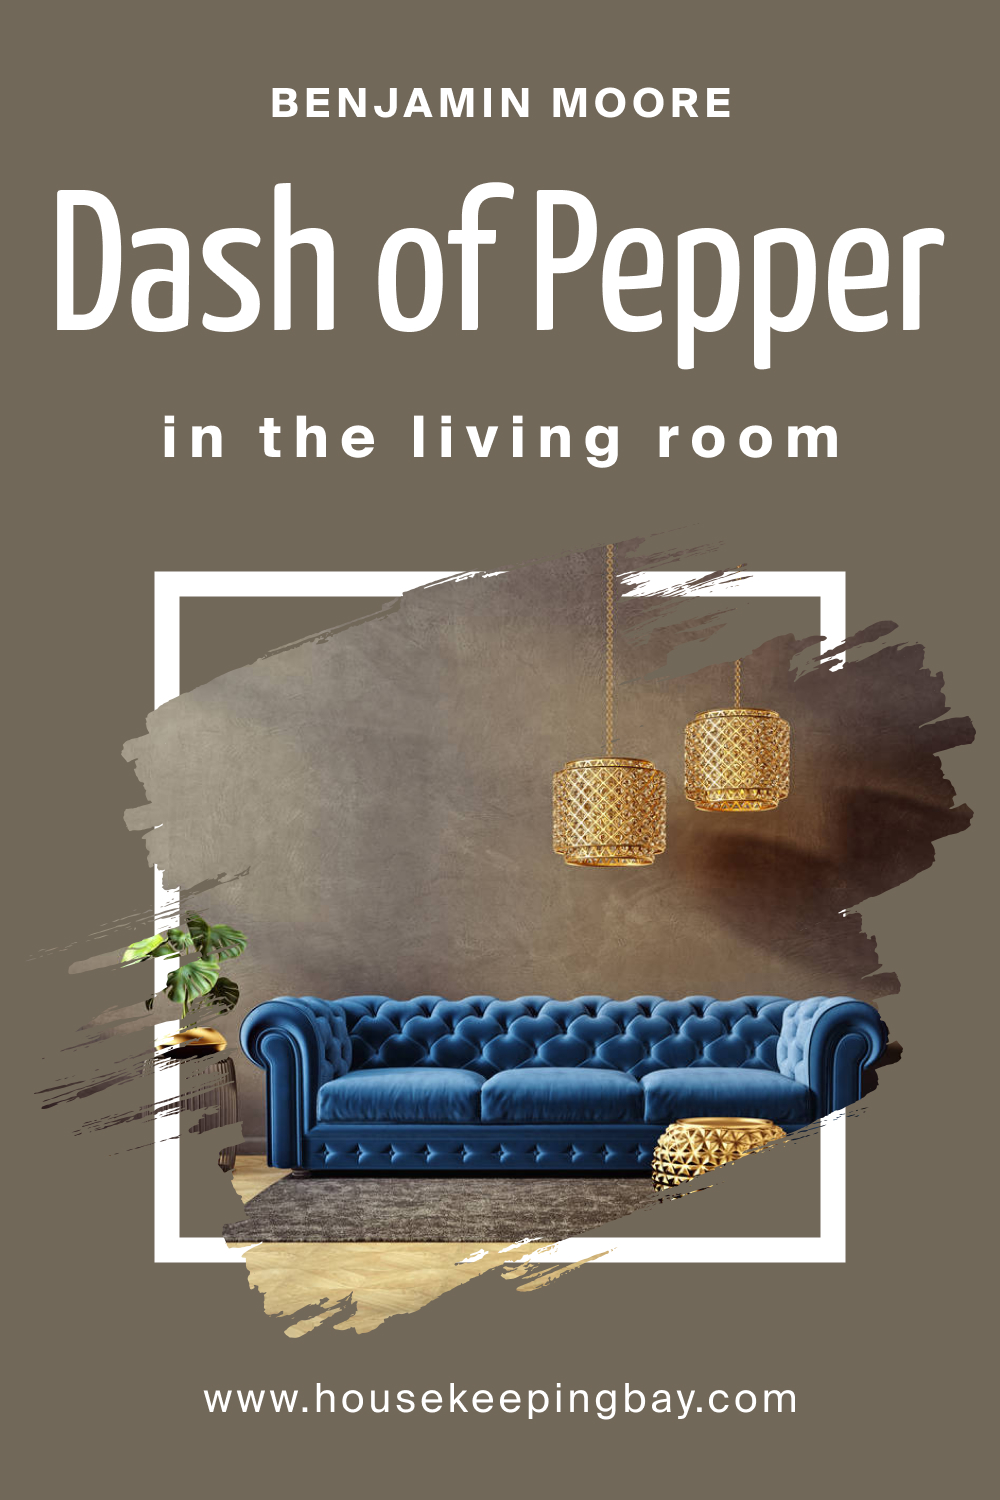 How to Use BM Dash of Pepper 1554 in the Living Room?